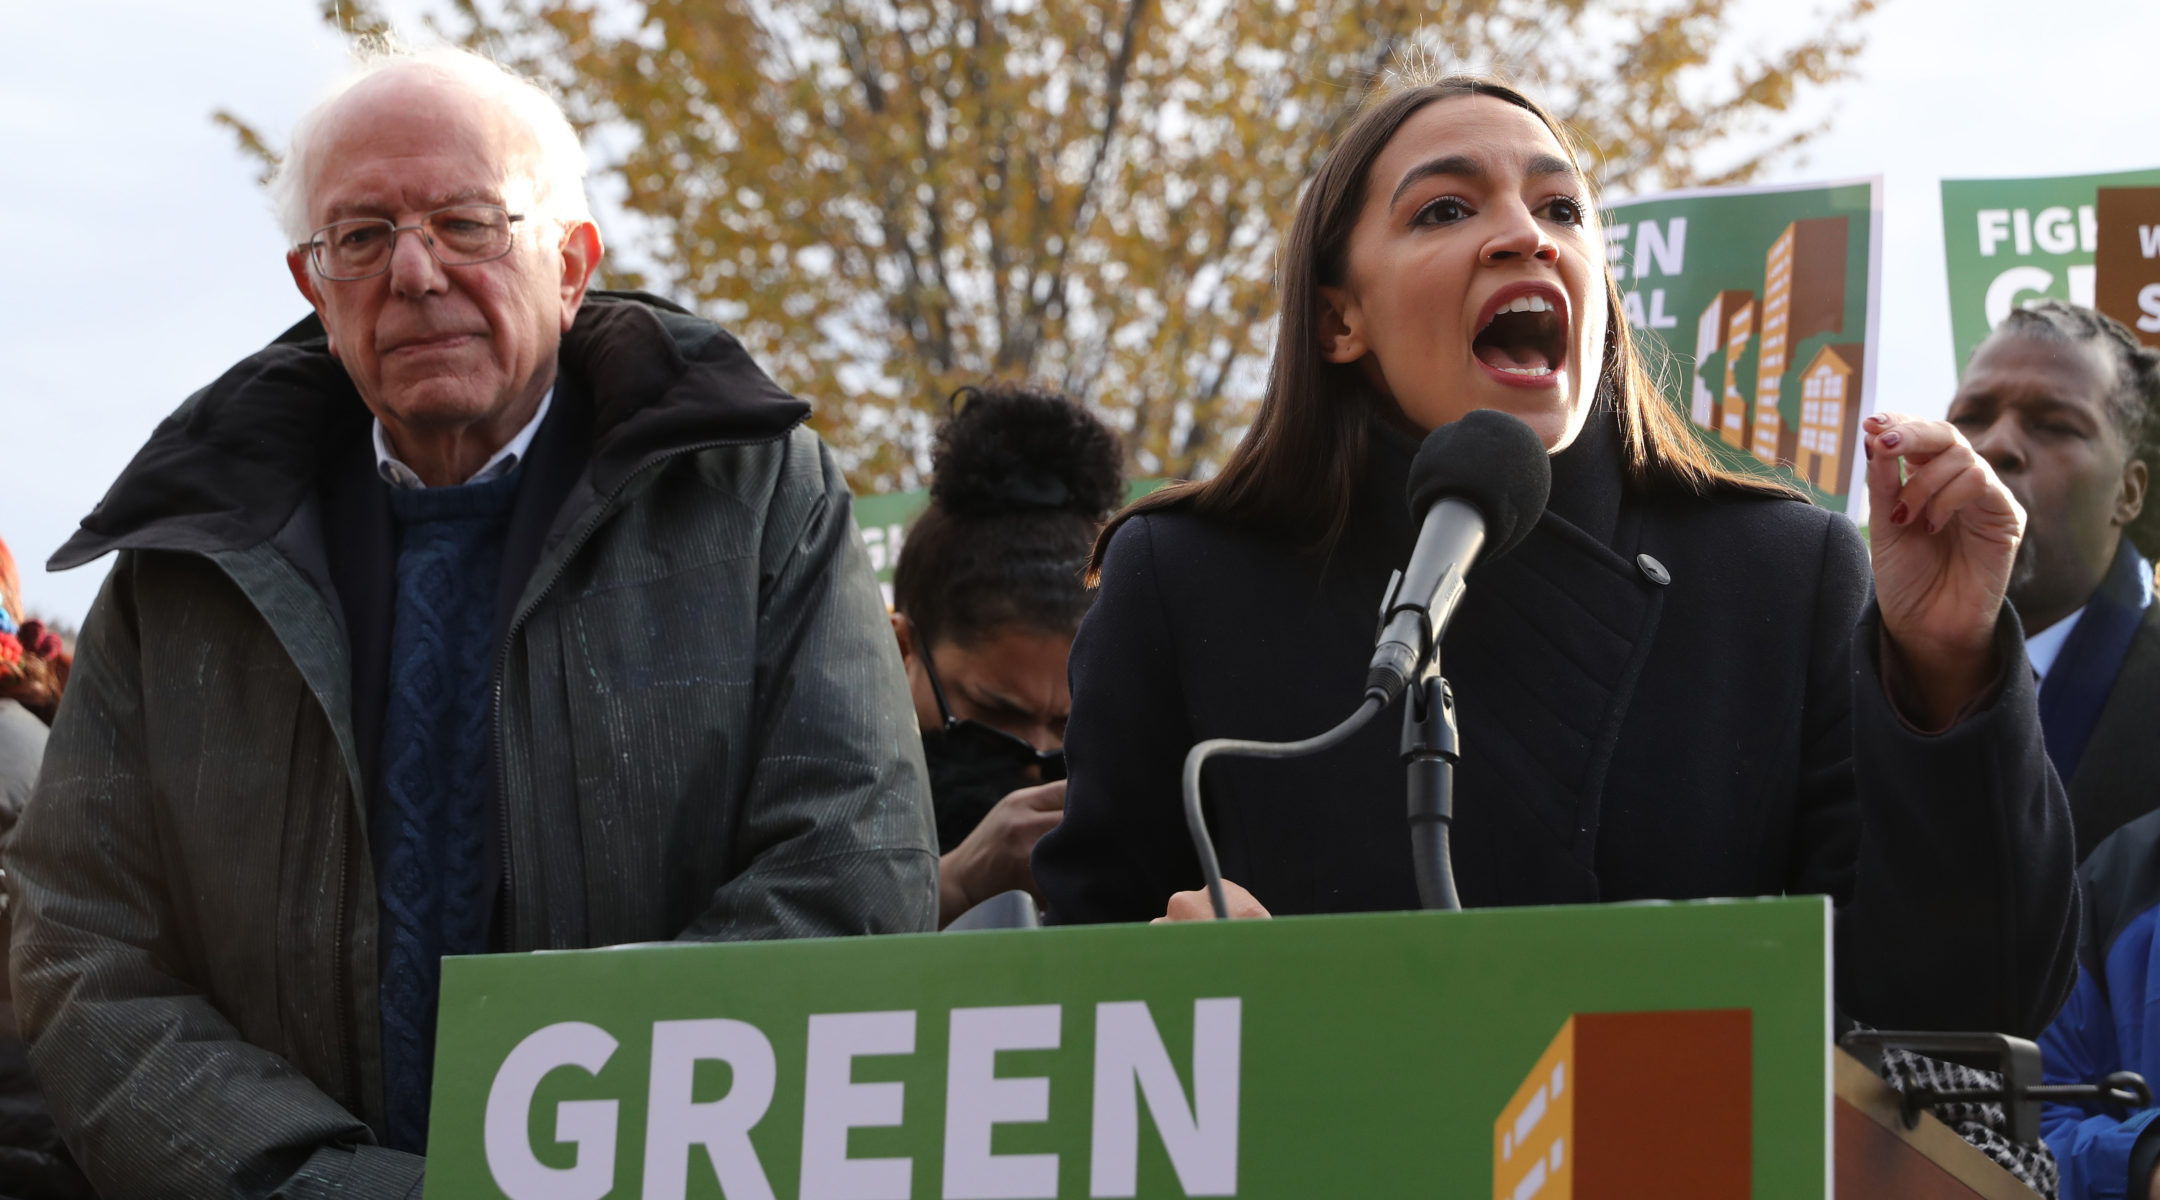 Democratic presidential candidate Sen. Bernie Sanders and Rep. Alexandria Ocasio-Cortez holding a news conference in Washington, DC on November 14, 2019. (Chip Somodevilla/Getty Images)